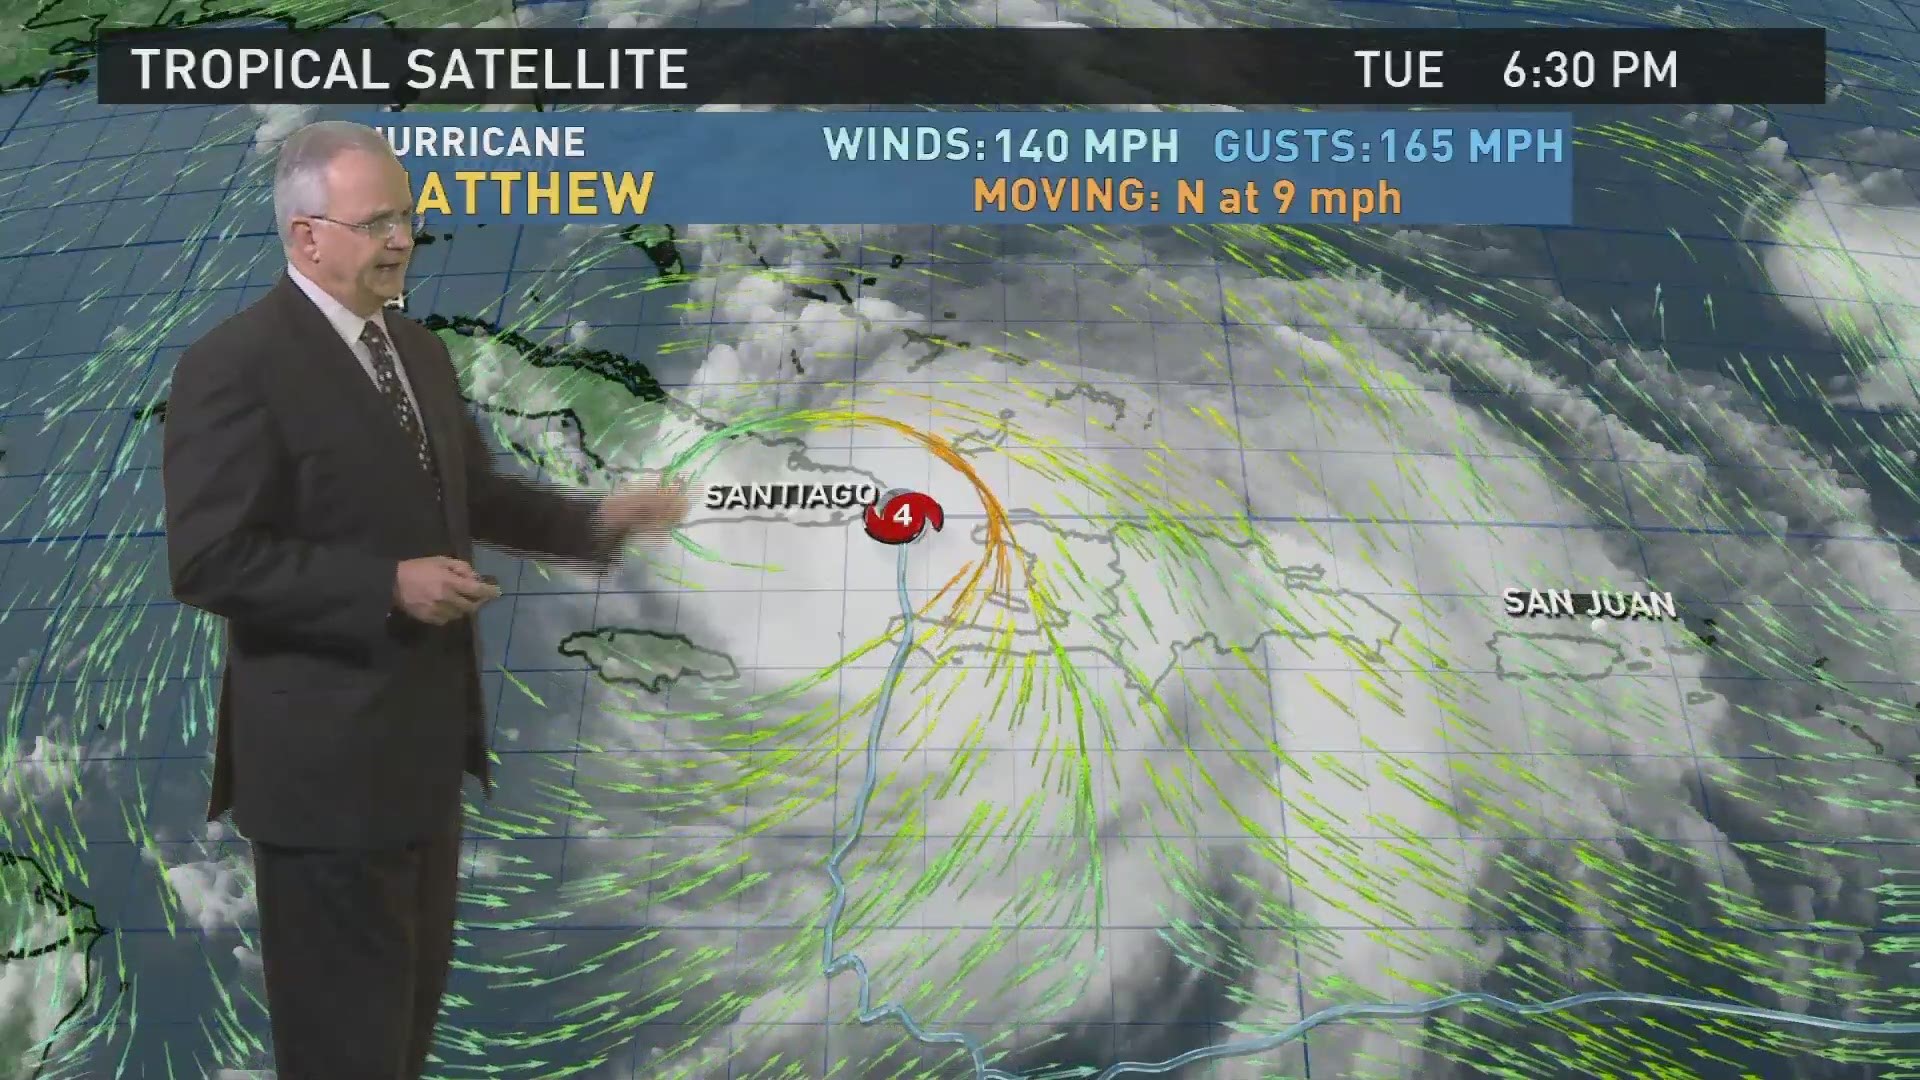 Jim Gandy's latest weather forecast on Hurricane Matthew, delivered on October 4.